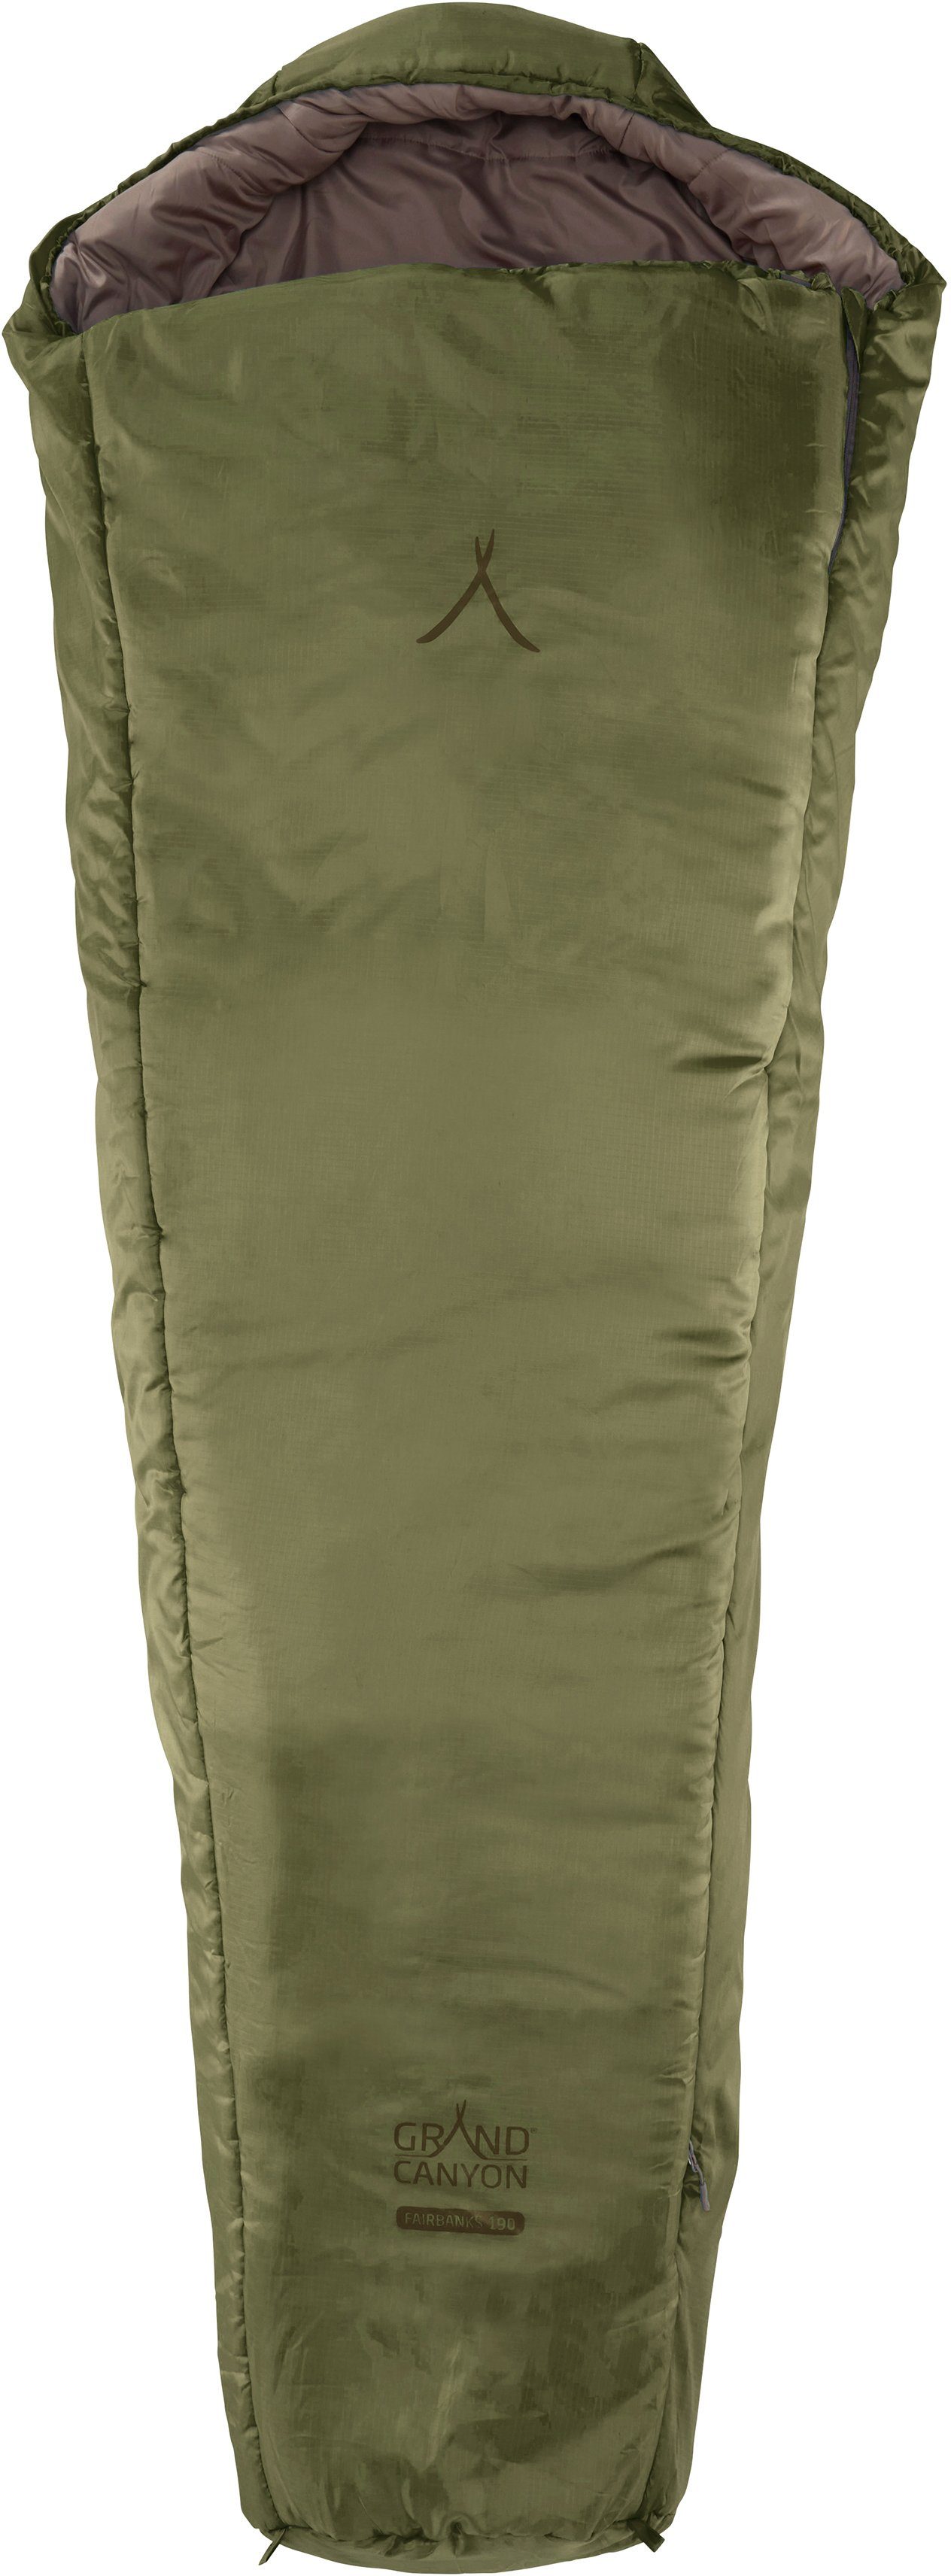 CANYON Capulet Olive tlg) GRAND (2 FAIRBANKS Mumienschlafsack